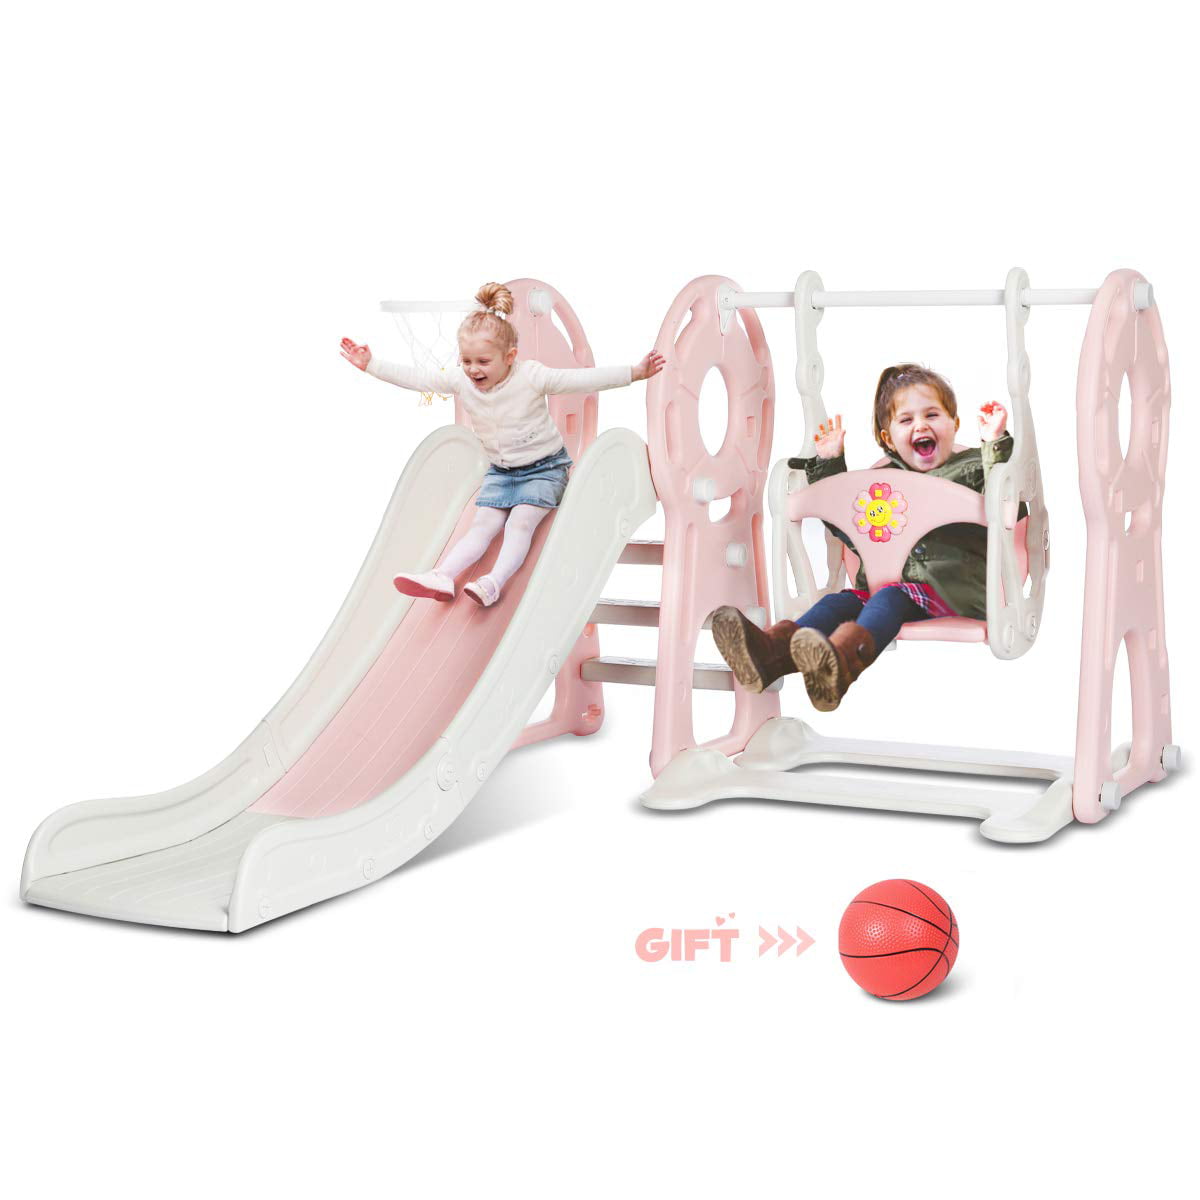 KingSo Slide and Swing Set for Toddlers 4 in 1 Combination Climber Slide Playset Basketball Hoop 63 Extra Long Slide Easy Climb Stairs Easy Set Up Baby Kids Playset for Indoor & Backyard Pink